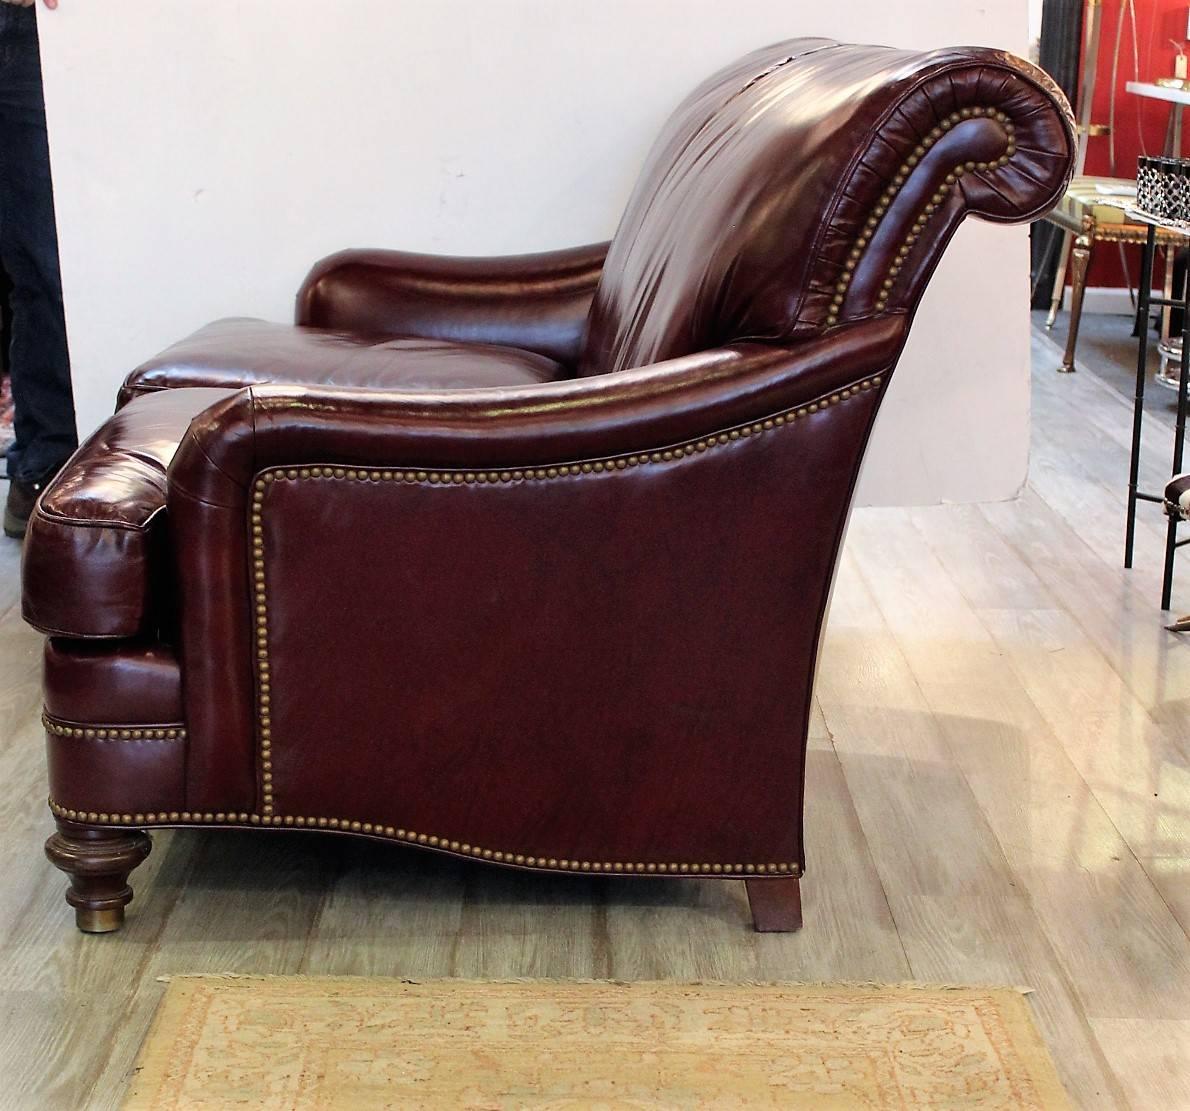 Handsome English style all leather roll back small sofa made by Hancock and Moore. The hand tailored leather is highlighted by antique brass nailhead trim. The frame is a kiln dried hard wood with eight-way hand tied hourglass springs. The feet are